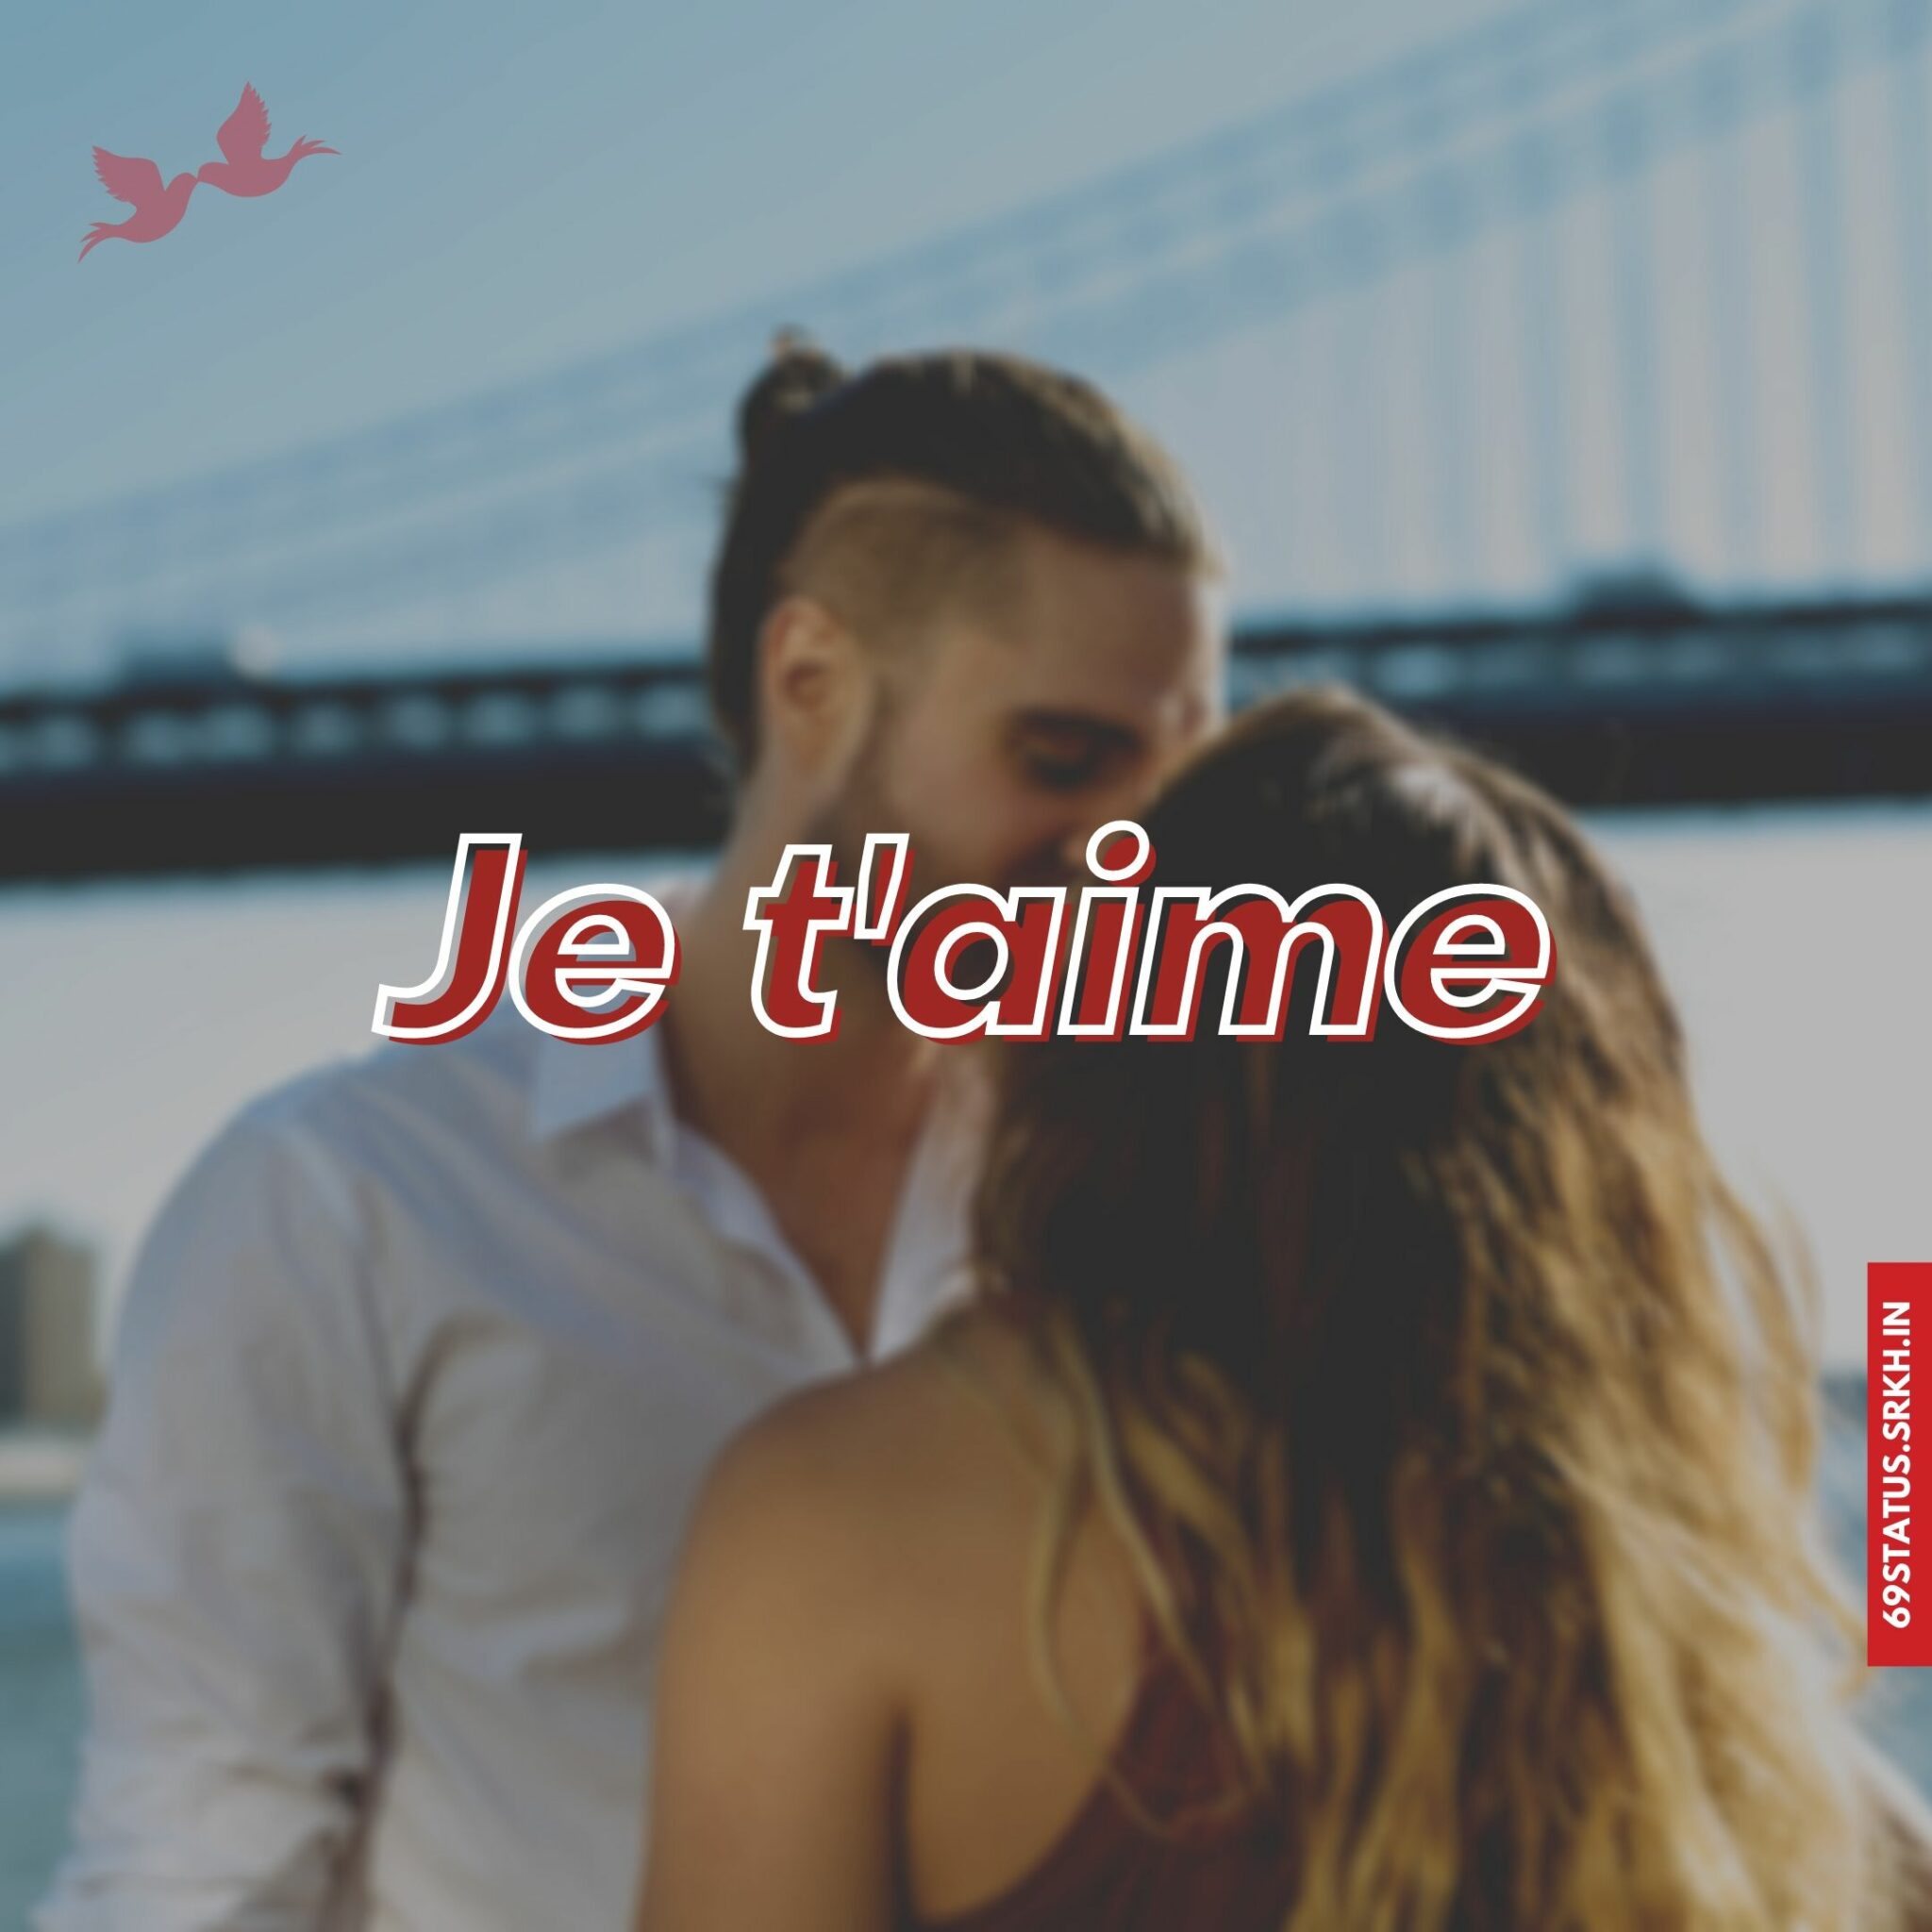 I Love You in french images hd